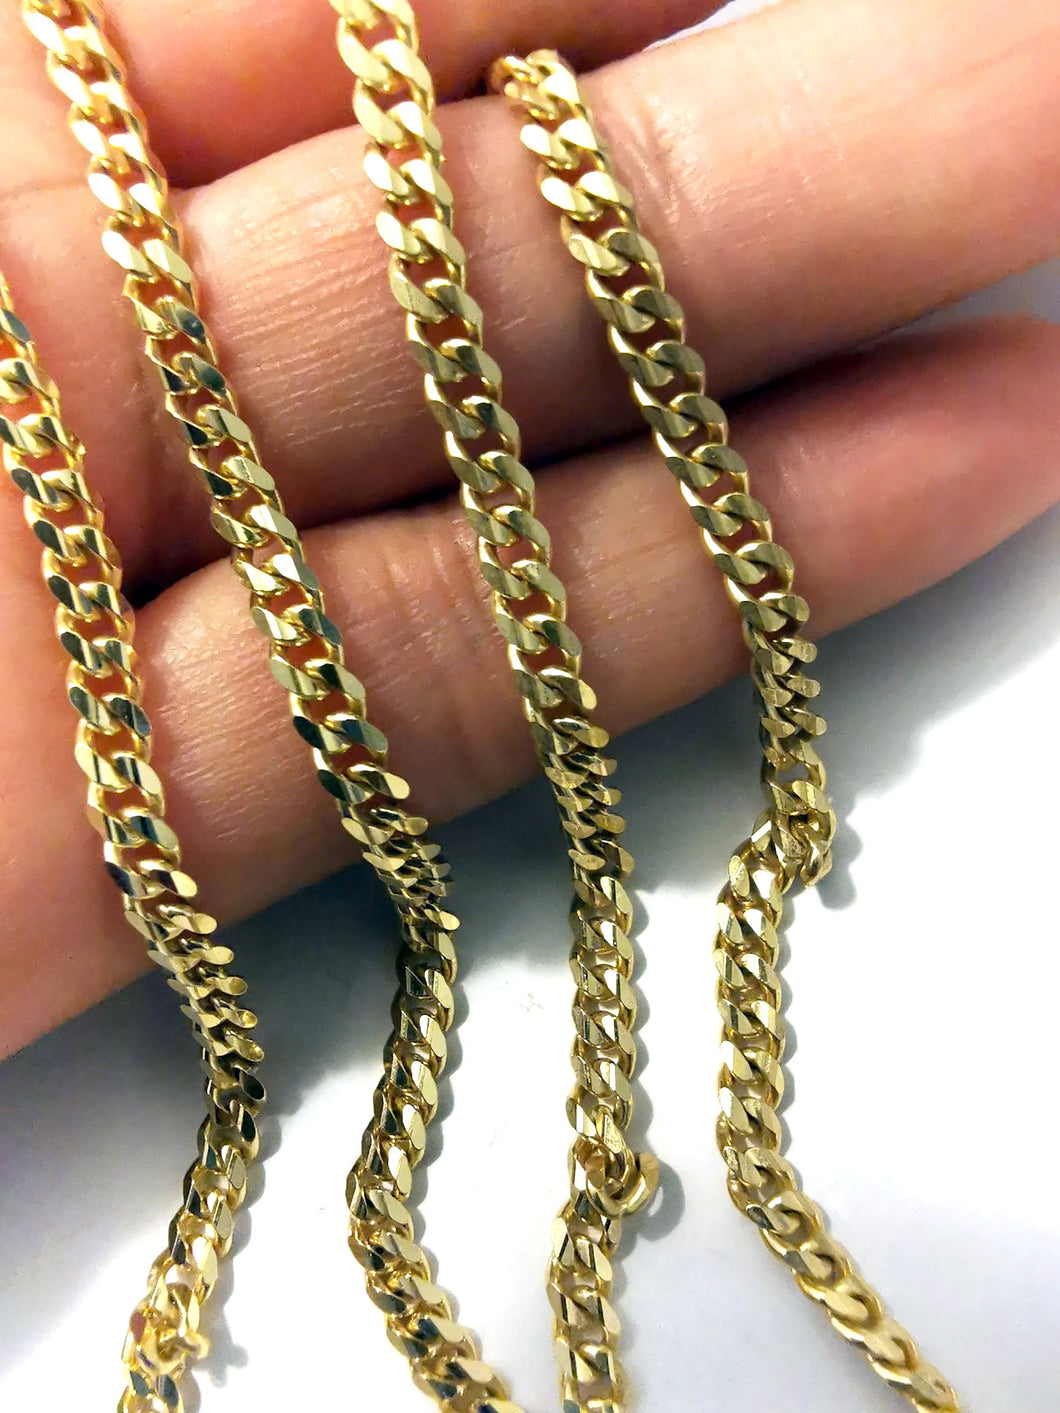 SOLID Gold Chain, 10k Yellow Gold, Chunky Chain, Layered Necklace, Stackable Chains, Mens Gold Necklace, Mens Jewelry, Birthday Gift